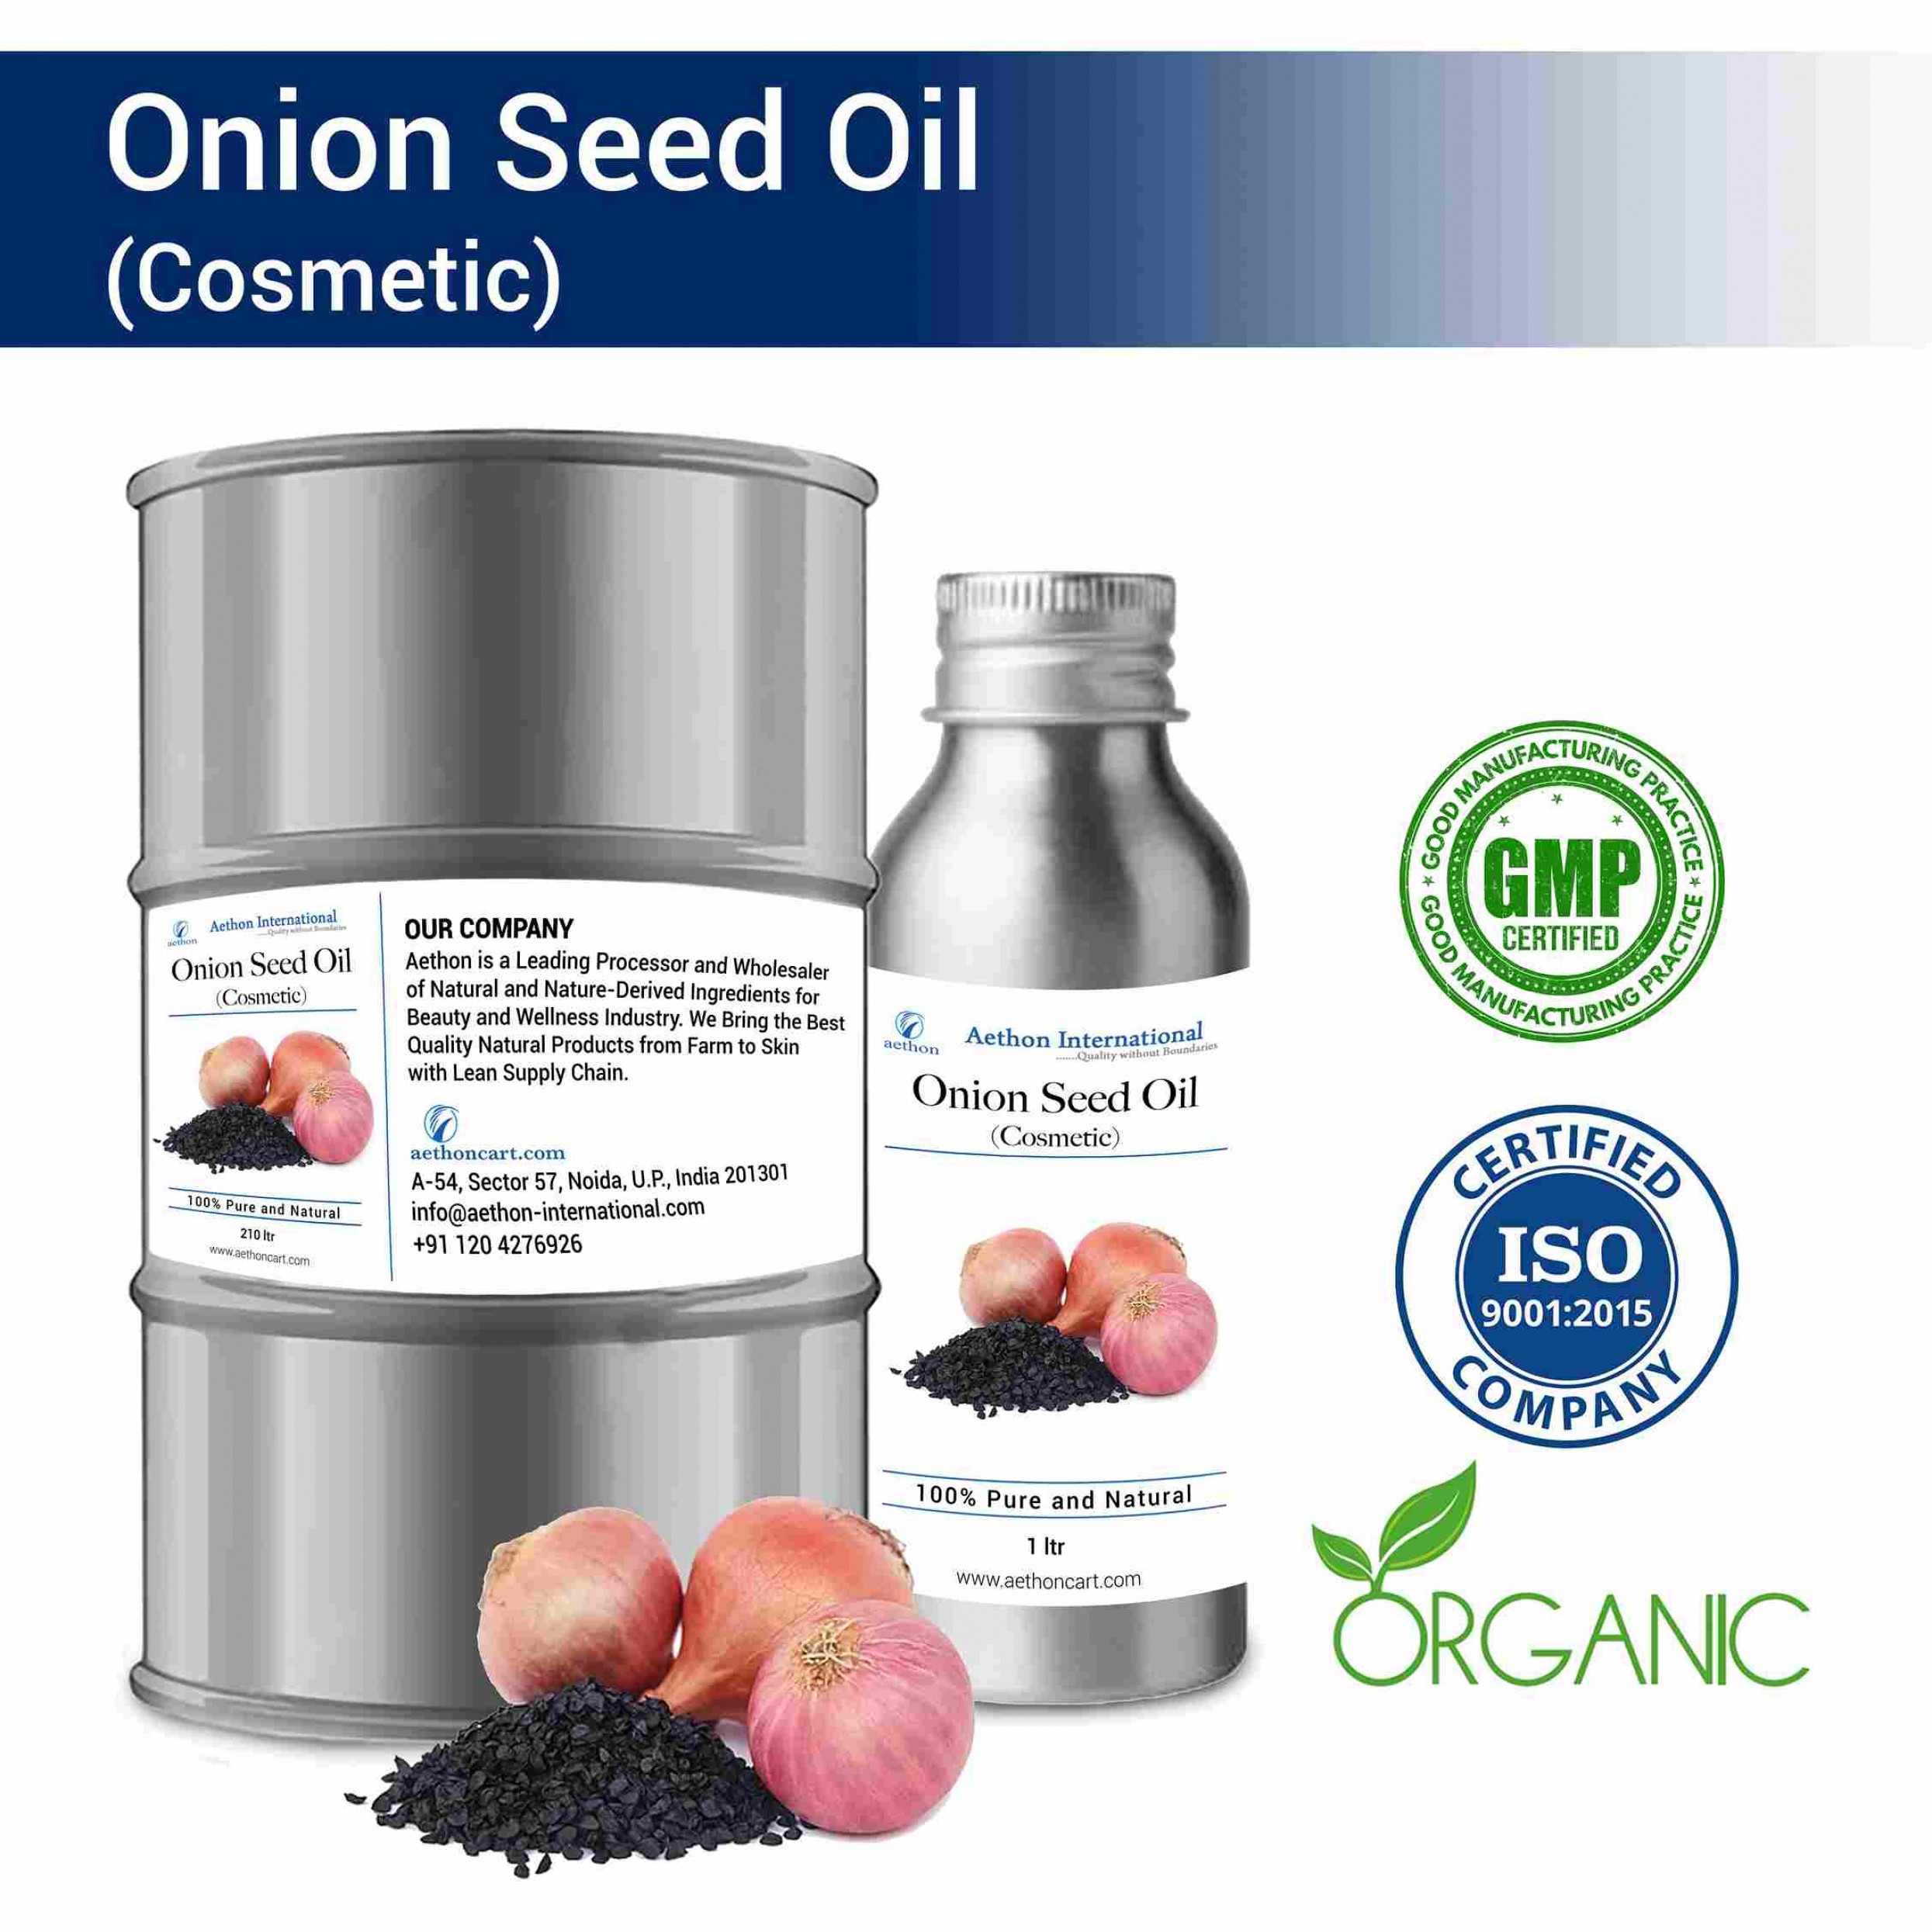 Onion Seed Oil (Cosmetic)